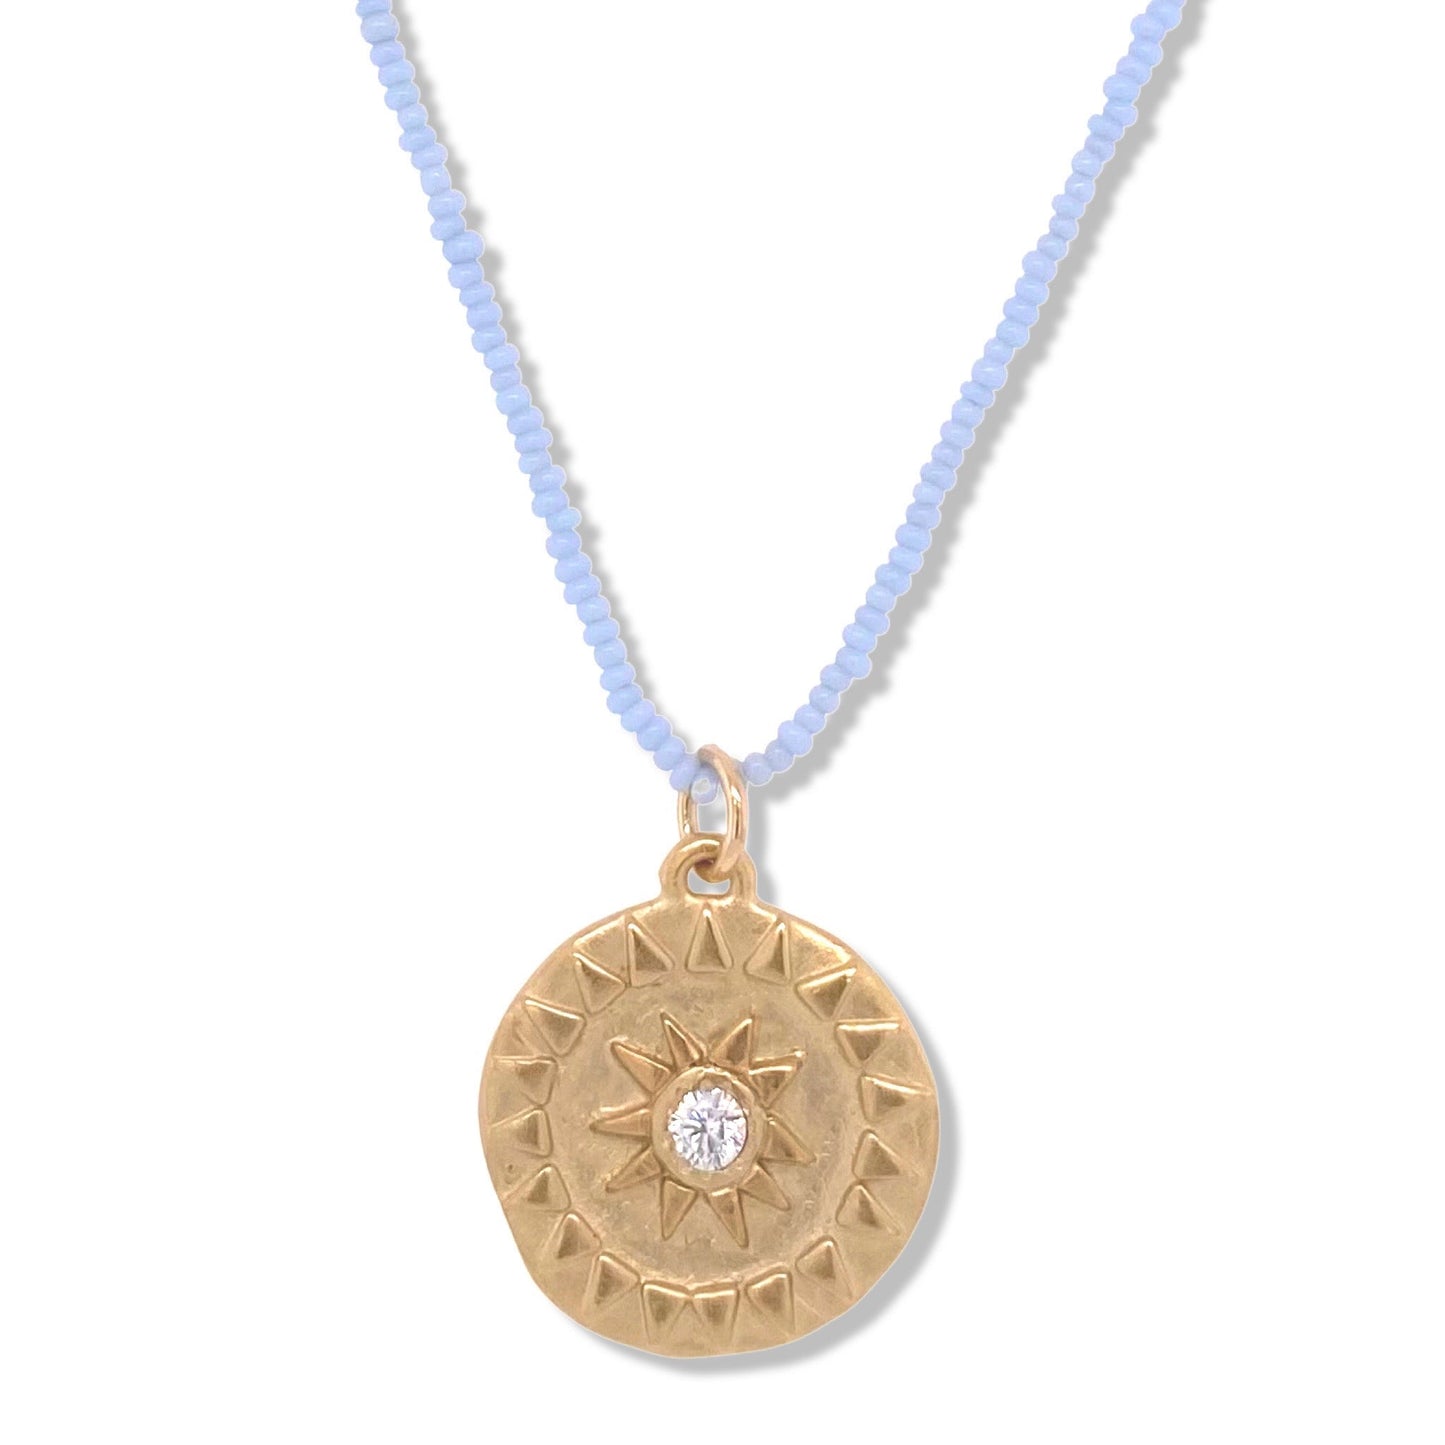 Sol Necklace in Gold on Baby Blue Beads | Nalu |Nantucket